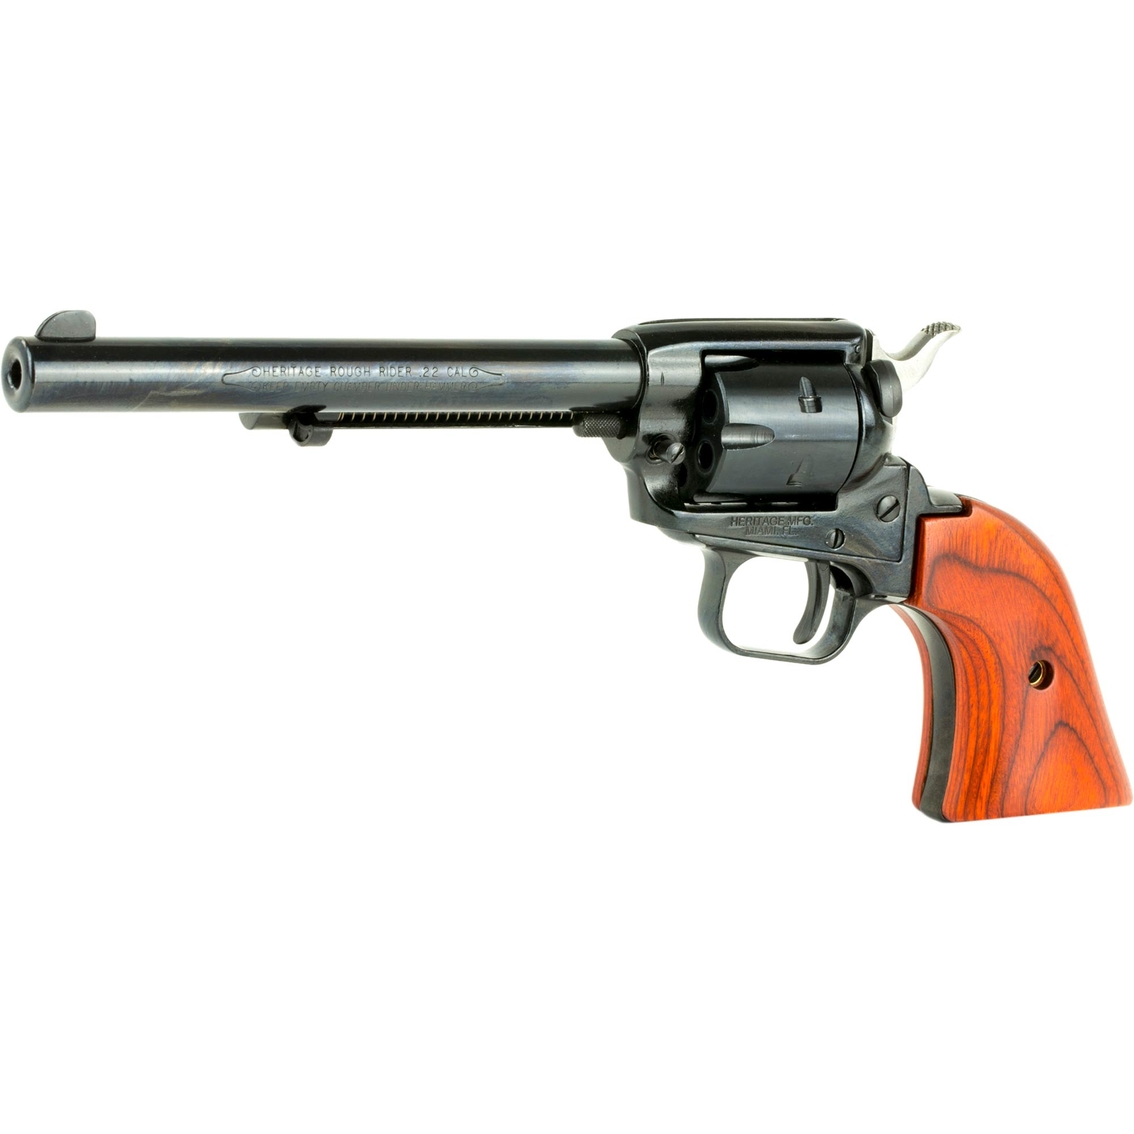 Heritage Rough Rider 22 LR 22 WMR 6.5 in. Barrel 6 Rds Revolver Blued with Wood Box - Image 3 of 3